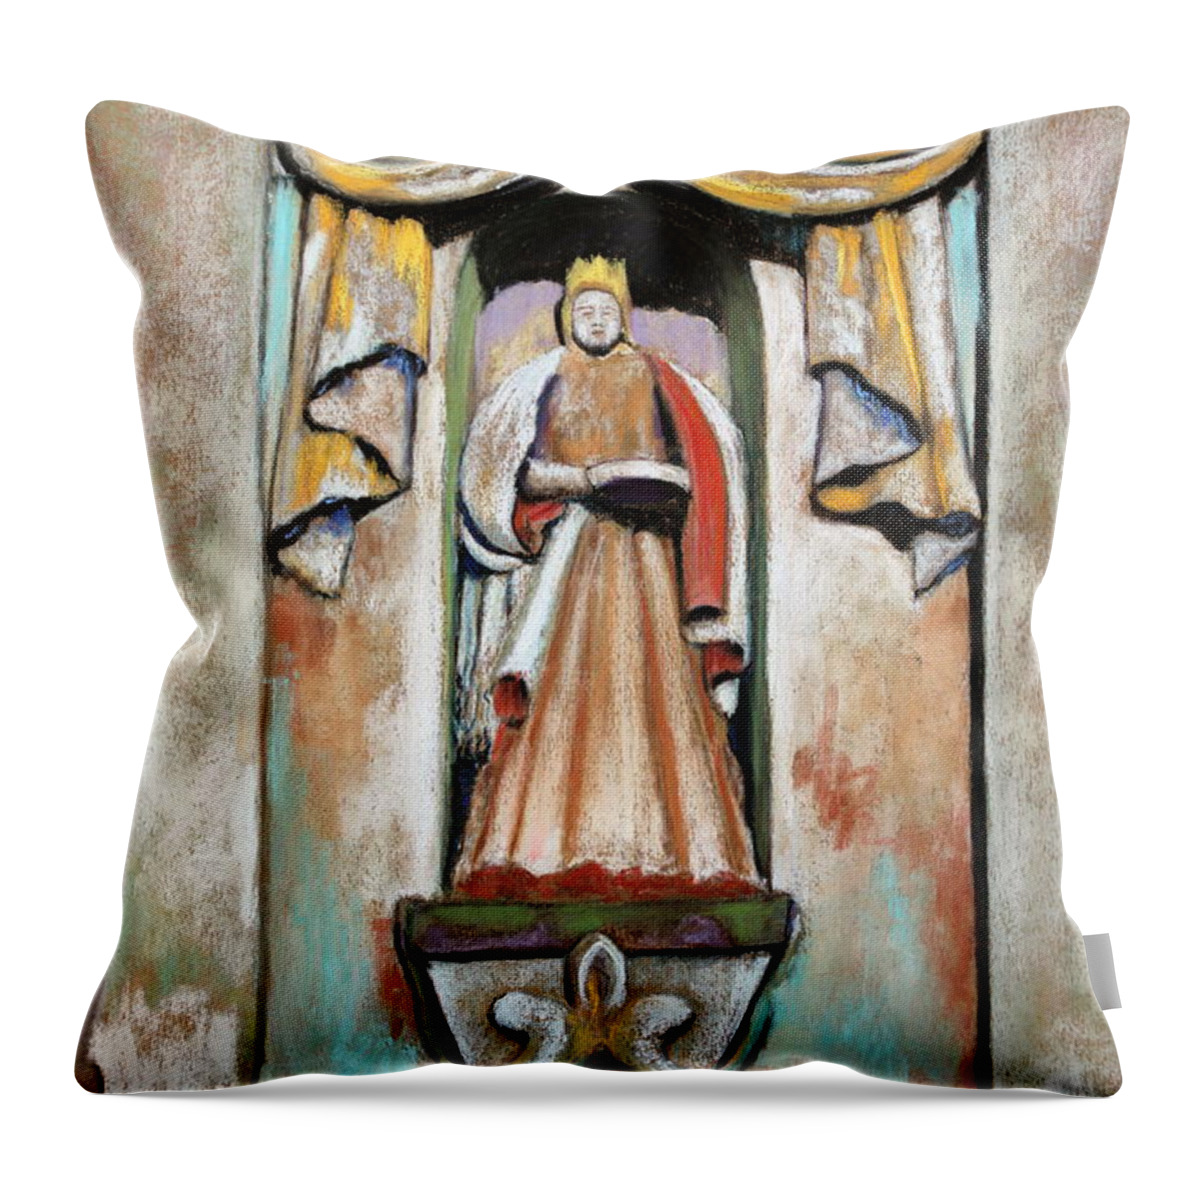 Statue Throw Pillow featuring the painting San Xavier Statue by M Diane Bonaparte